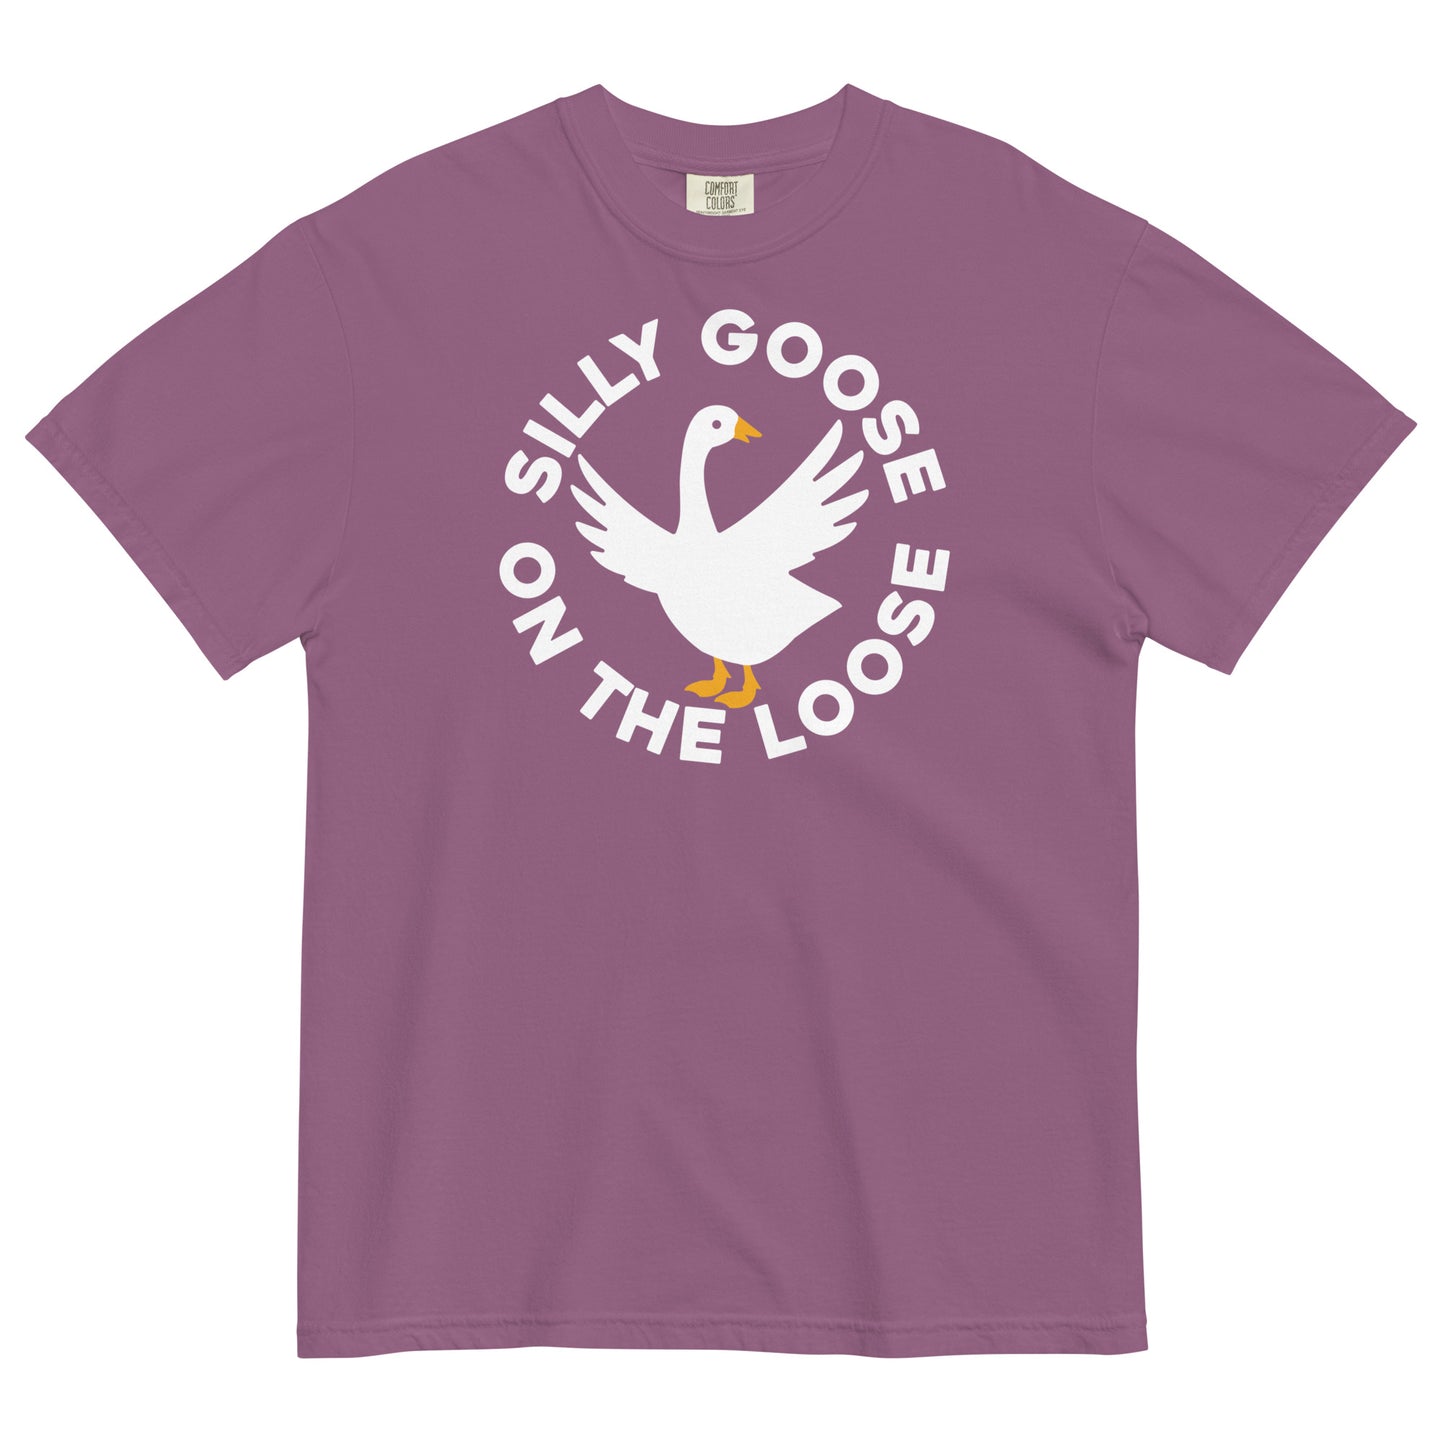 Silly Goose On The Loose Men's Relaxed Fit Tee